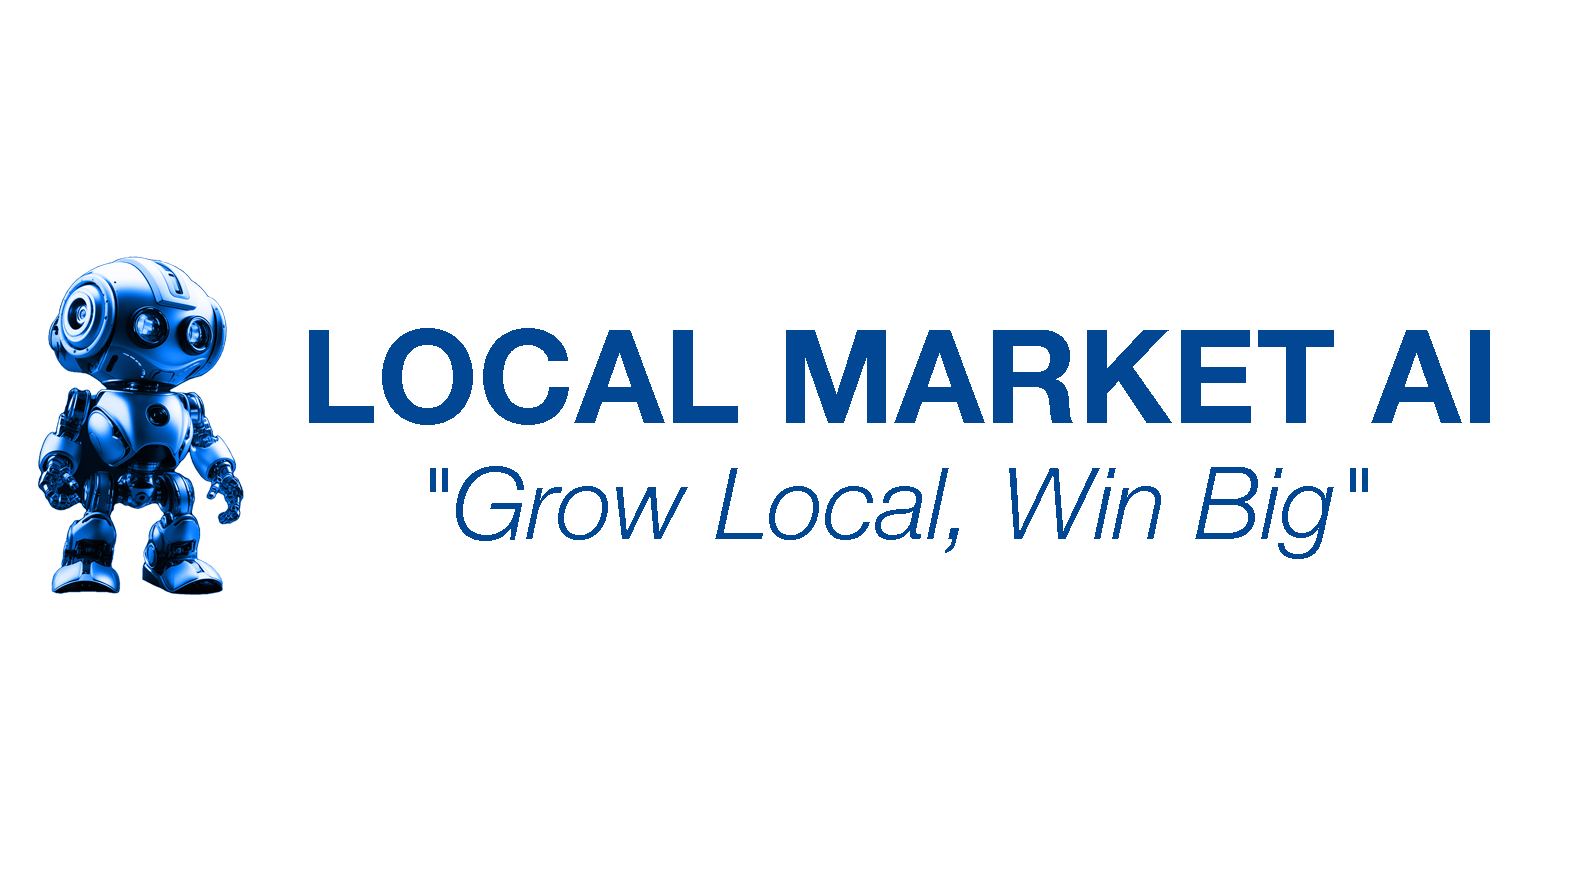 Marketing Agency Launches Local Market AI